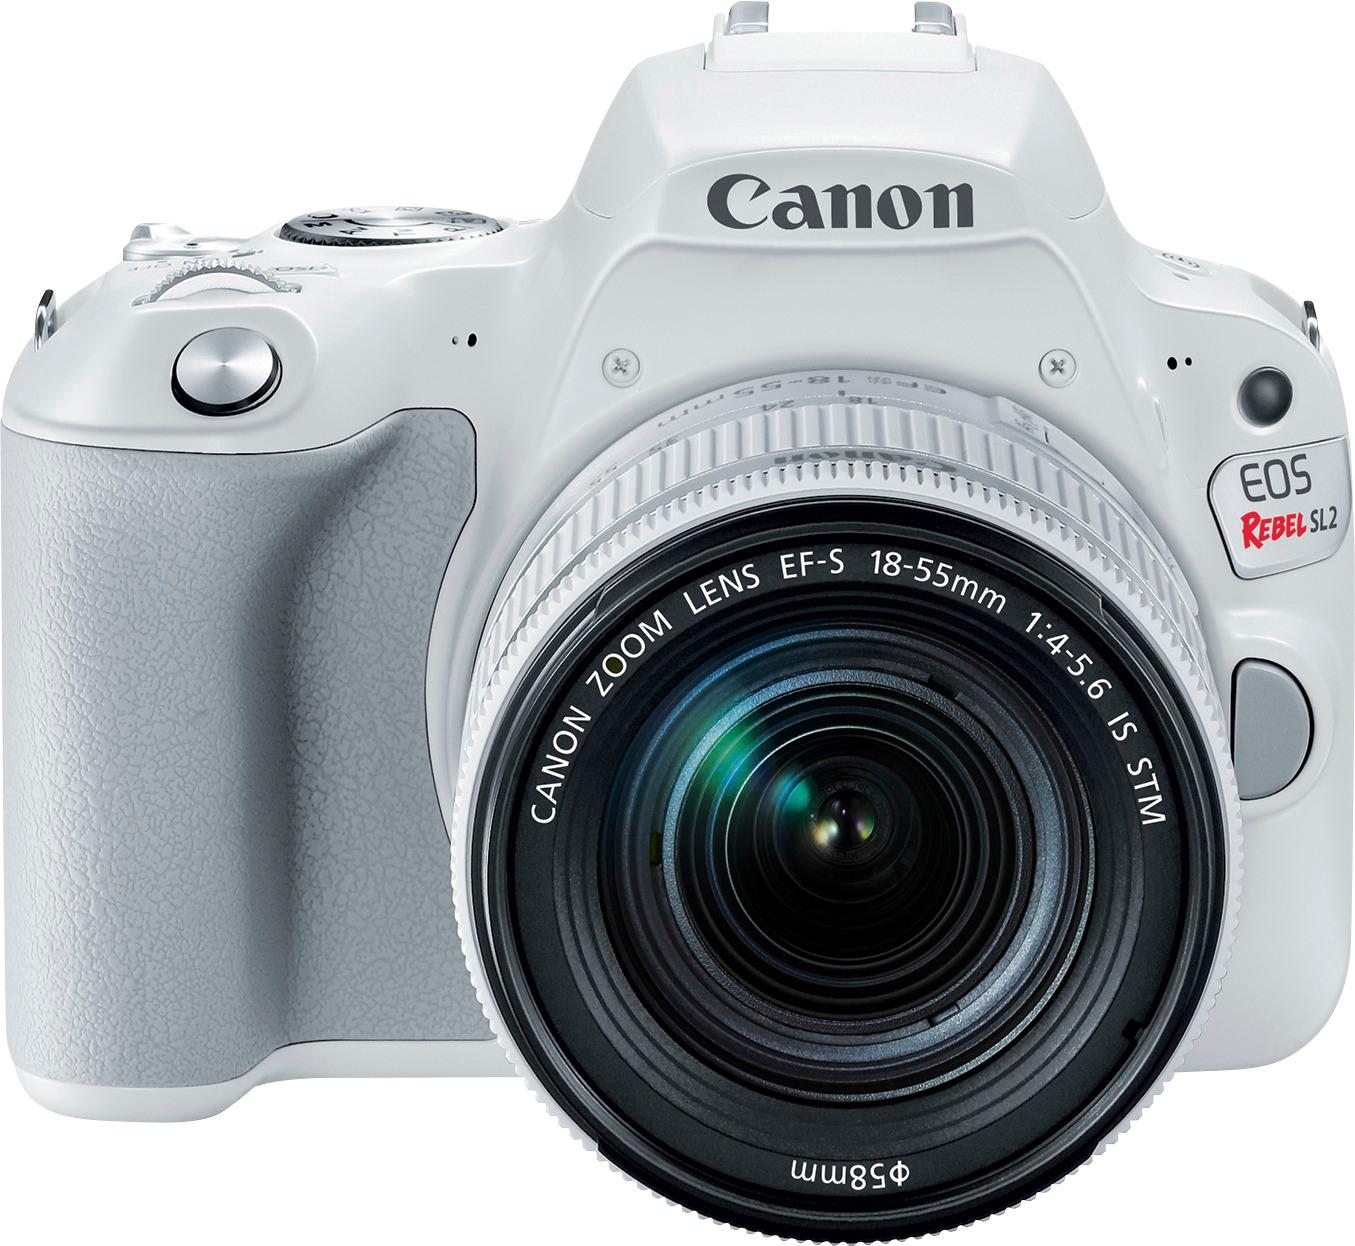 verband Uittreksel Open Canon EOS Rebel SL2 DSLR Camera with EF-S 18-55mm IS STM Lens White  2252C001 - Best Buy